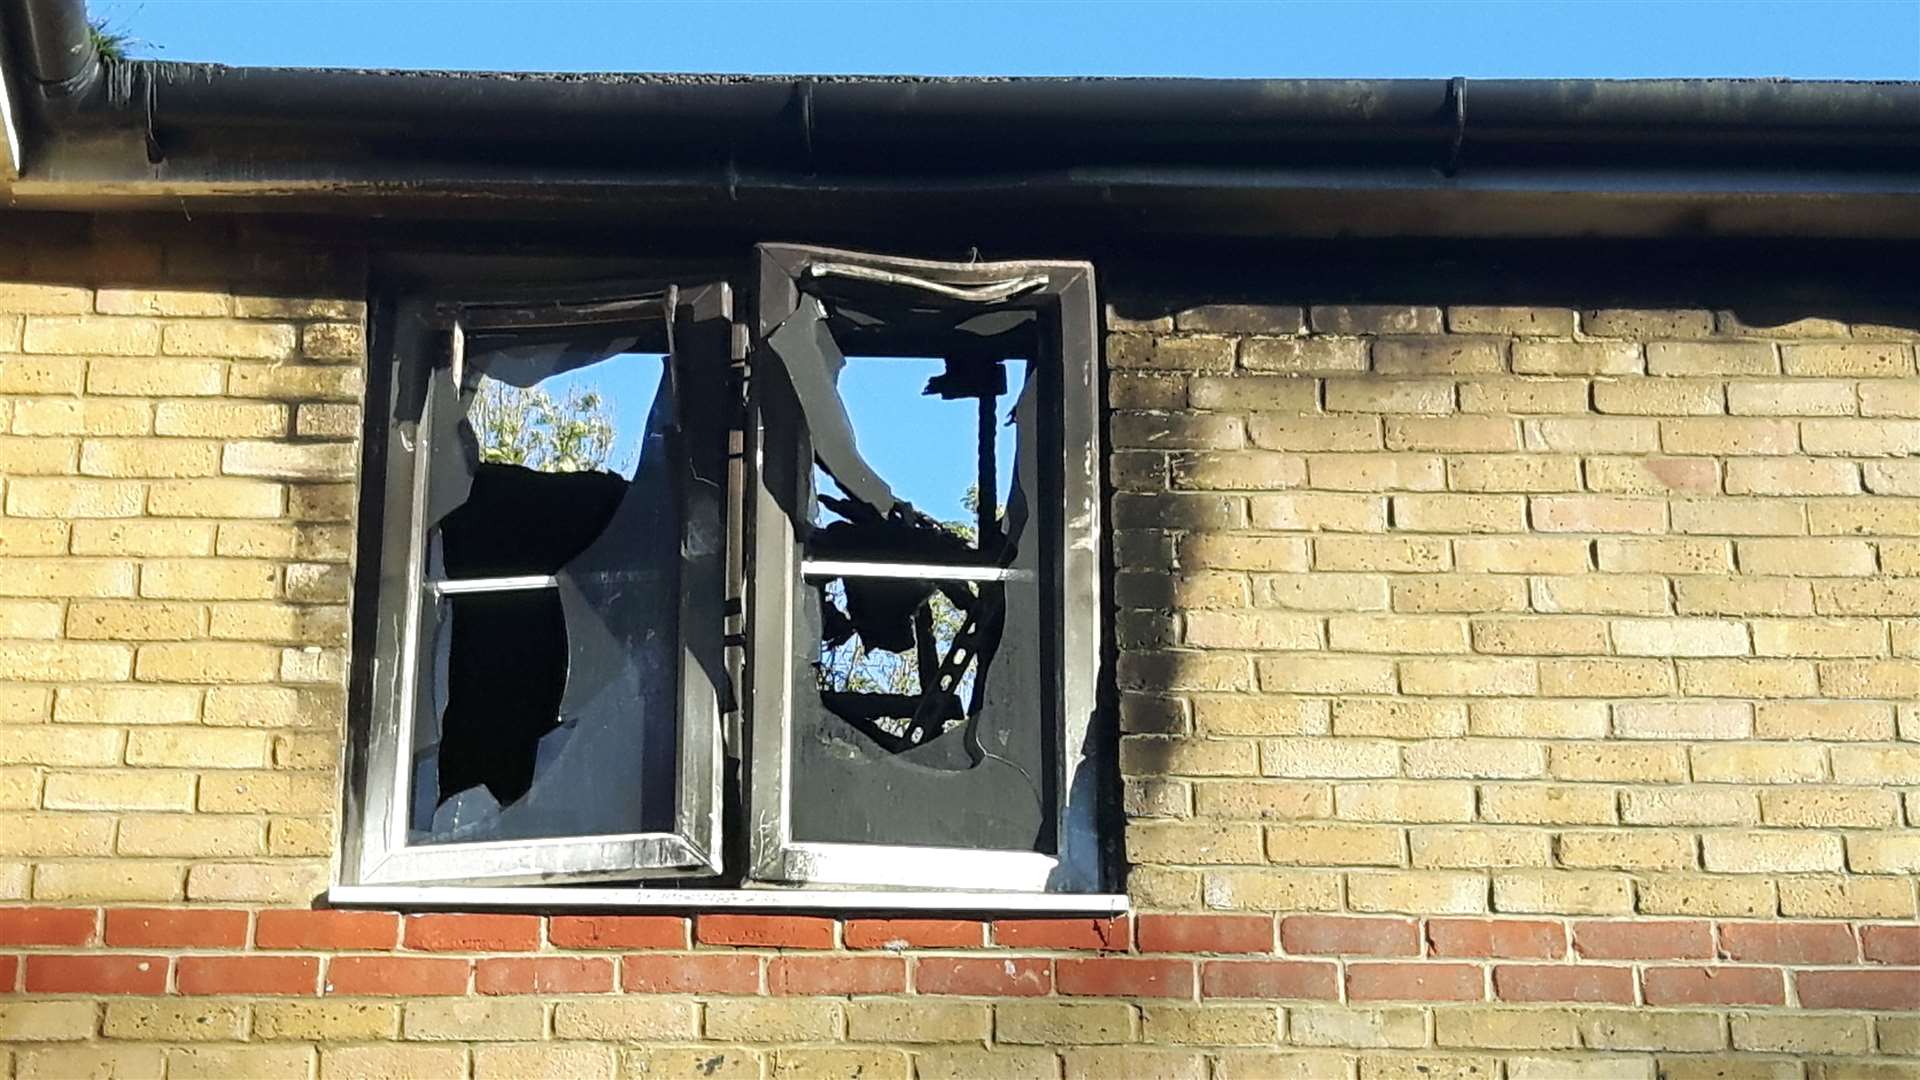 Grim past. The disused houses had repeatedly been struck by arsonists in 2017. This shows the third attack, that August